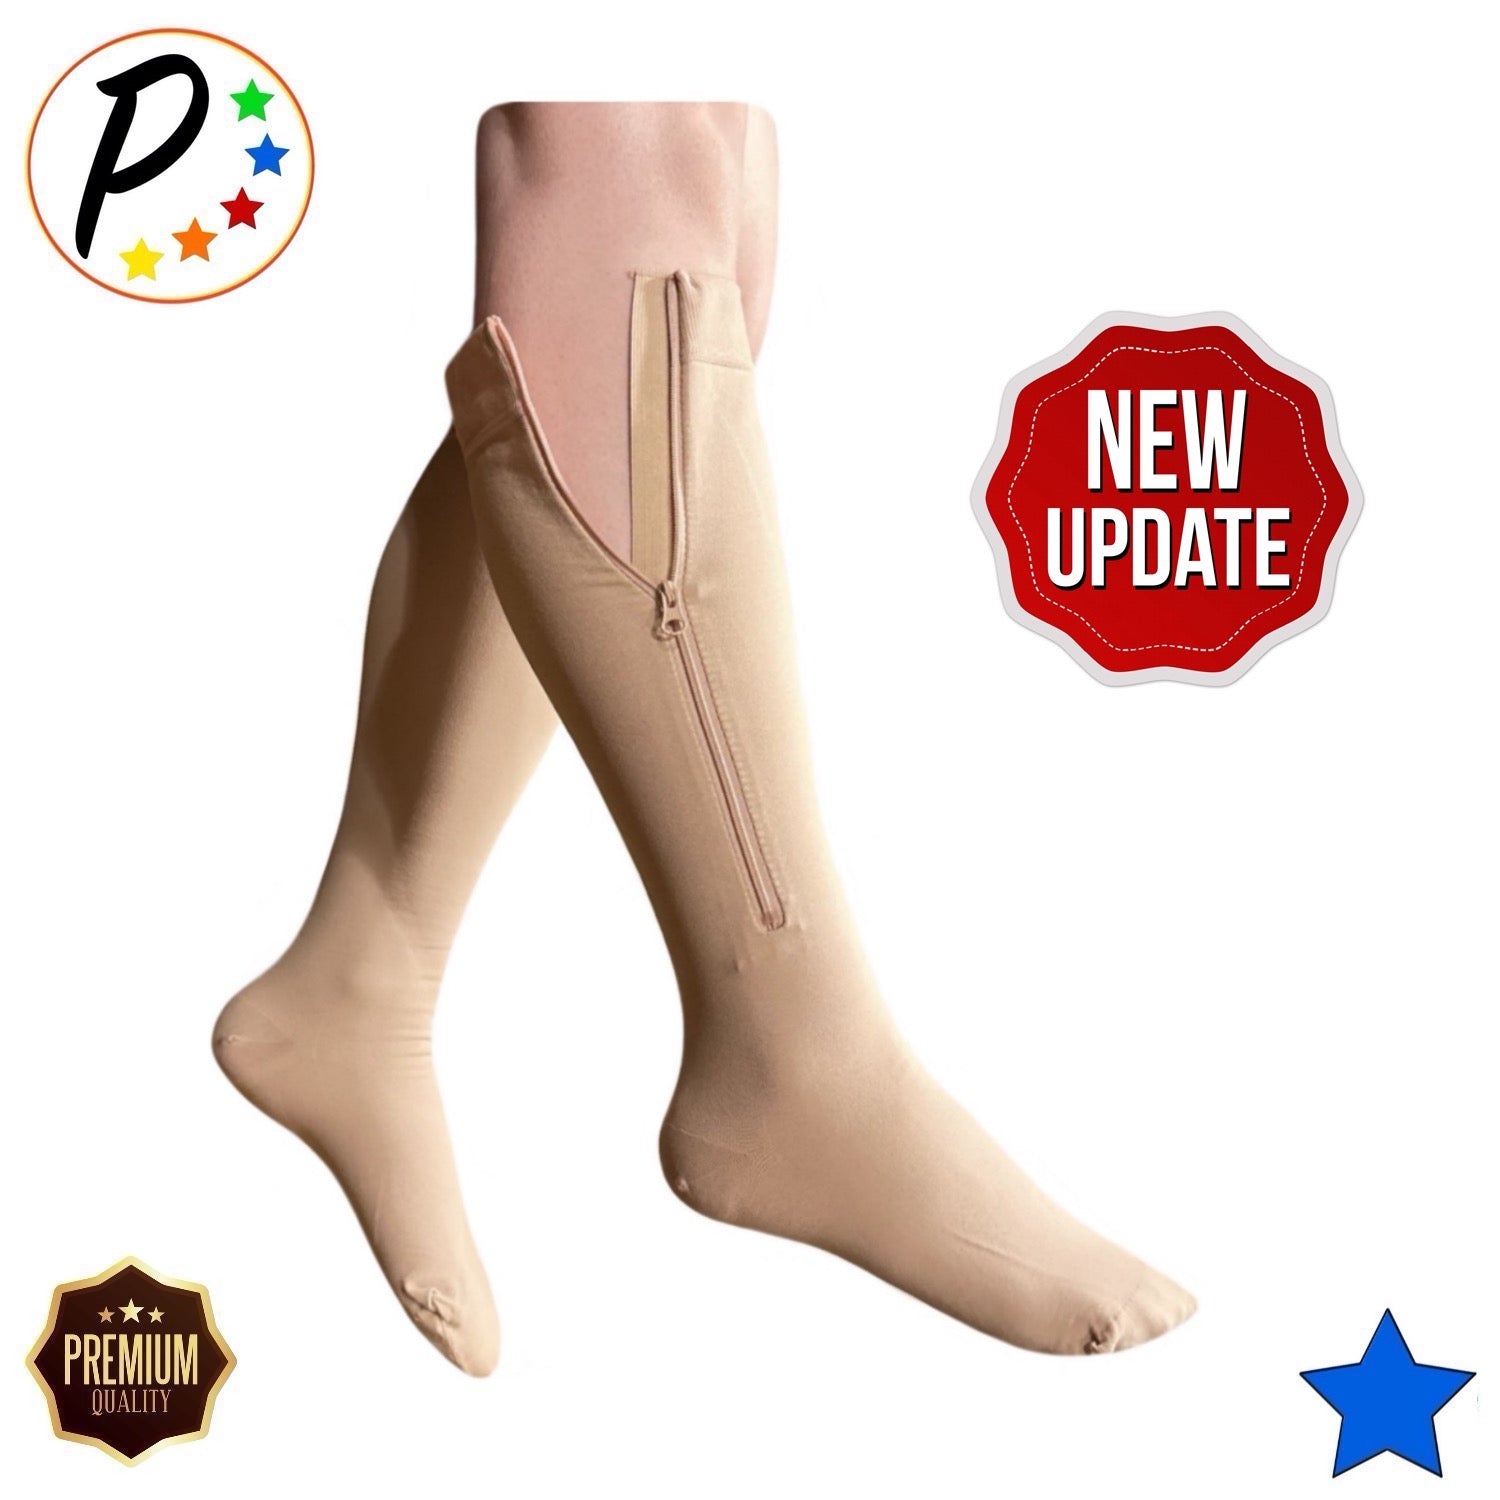 3 Pair Zippered Compression Socks Open Toe 30-40mmHg with Zipper Safe  Protection